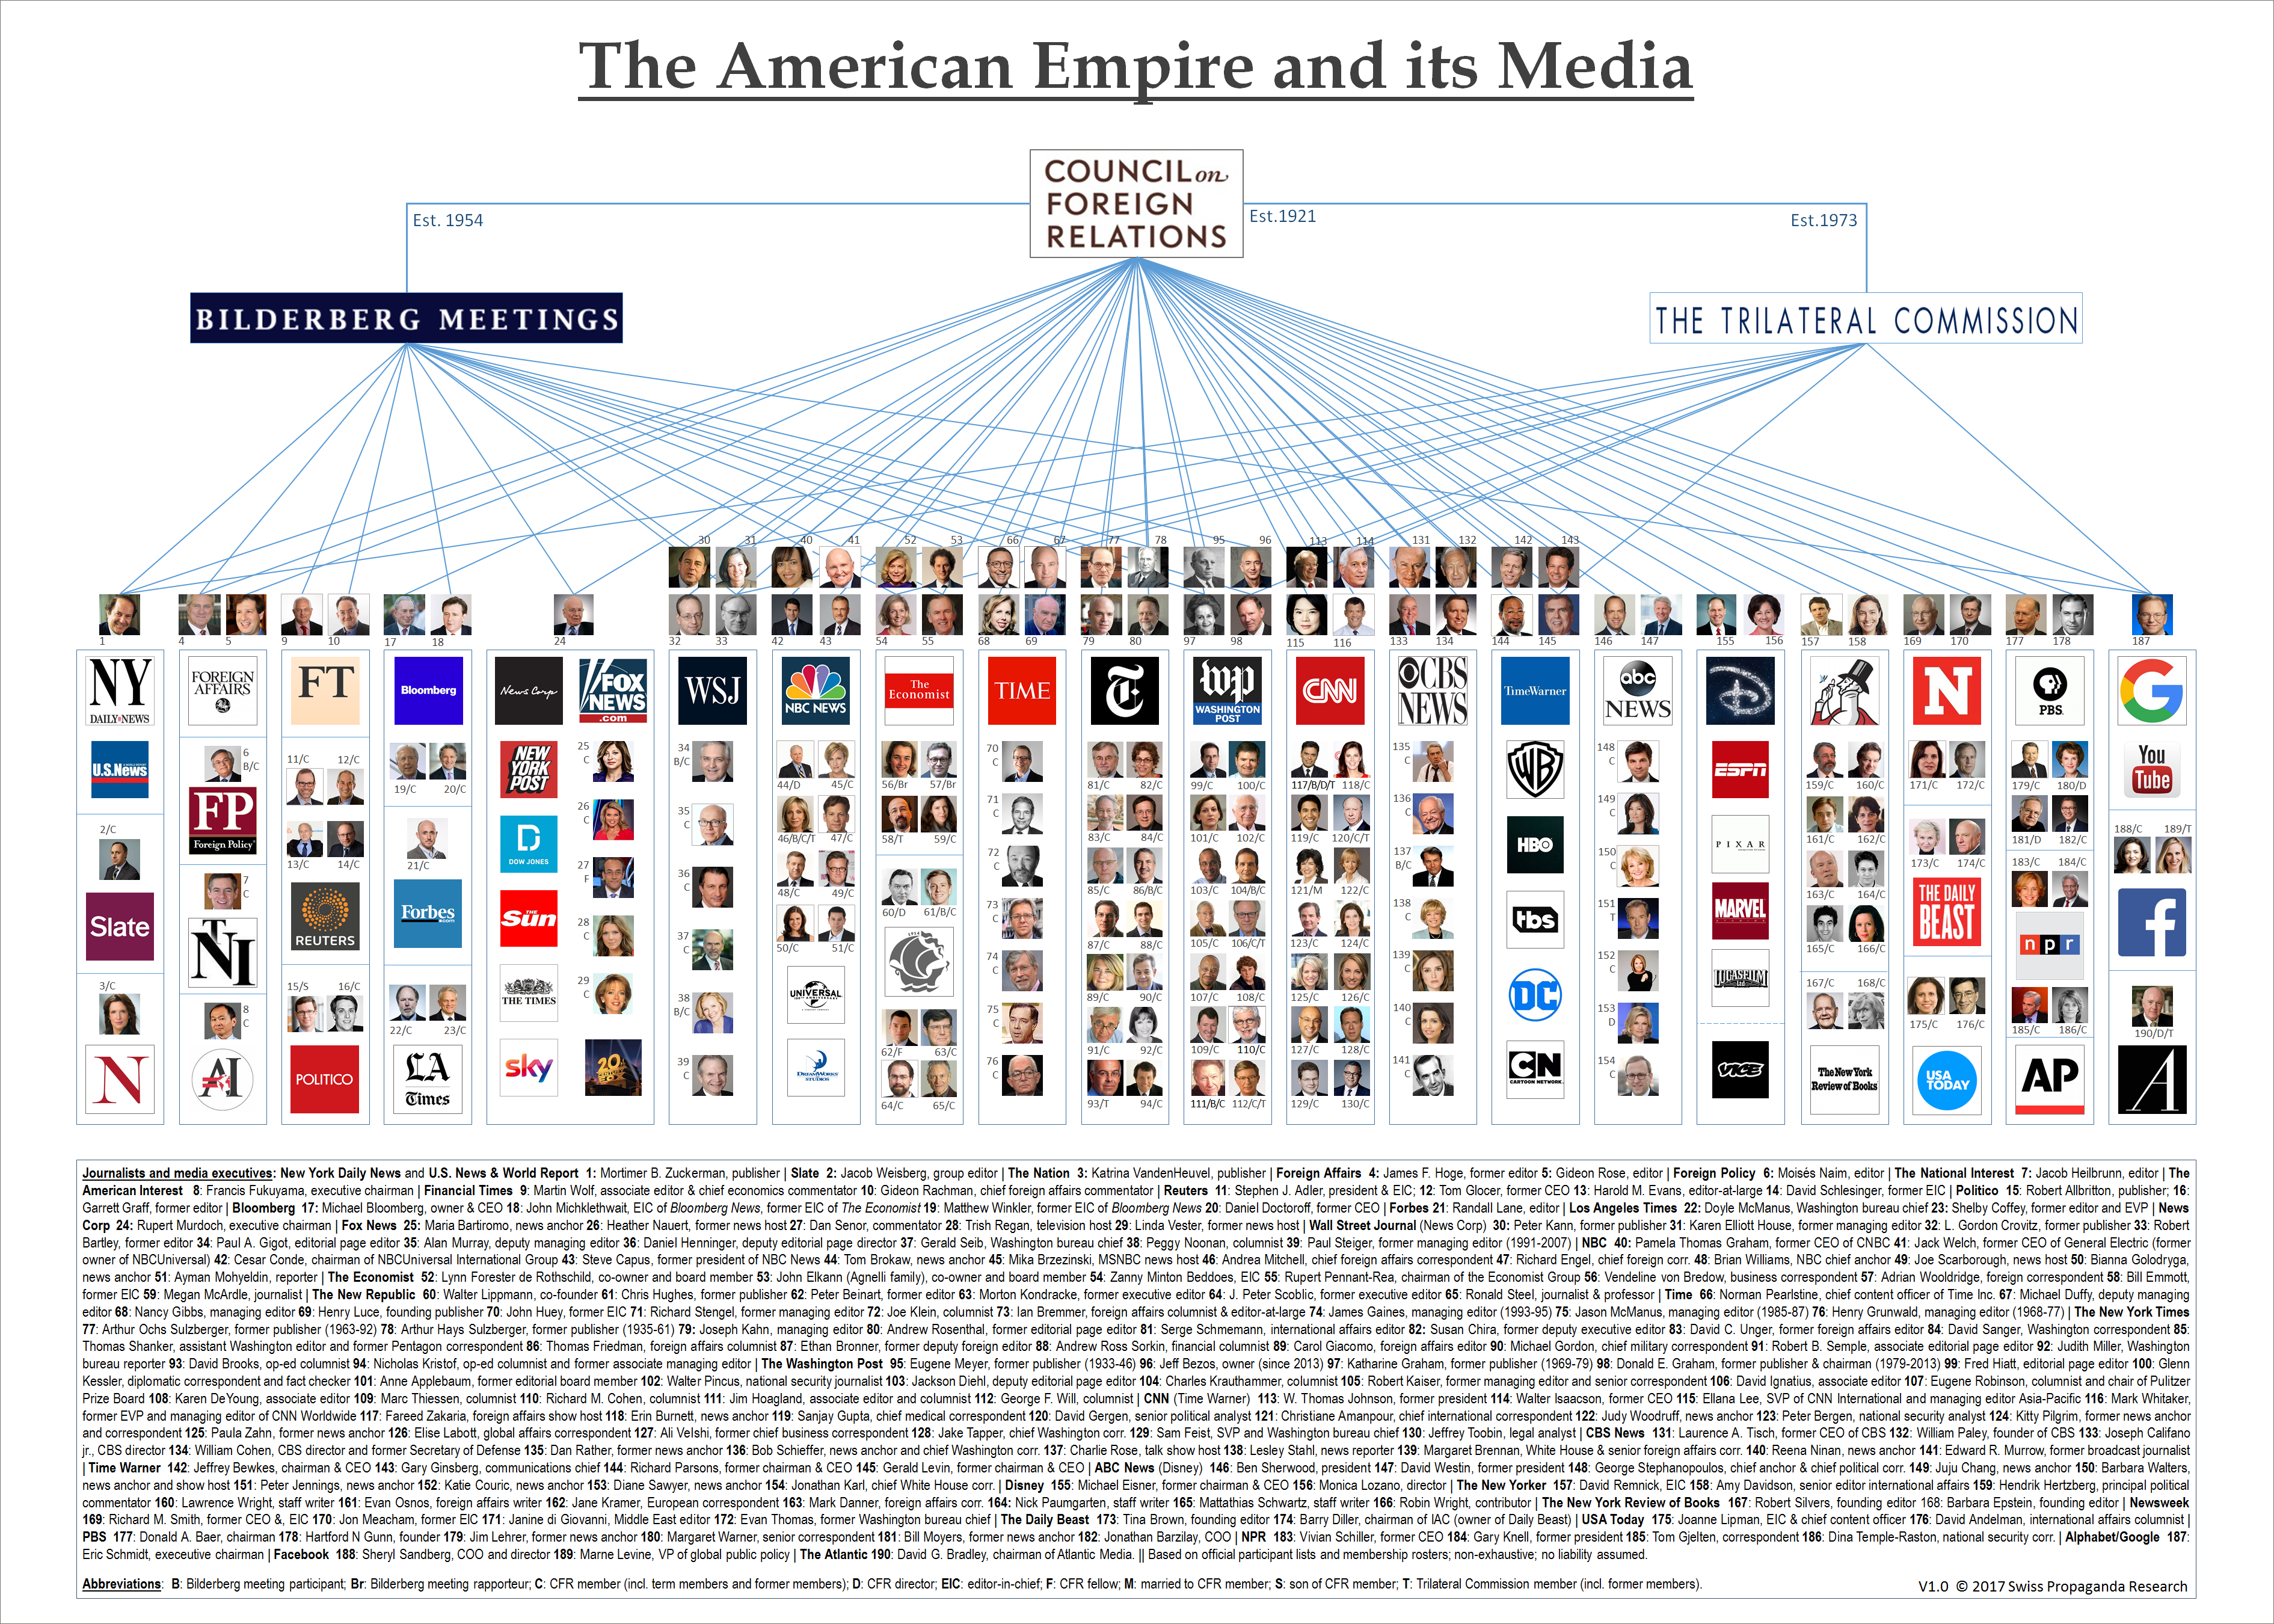 The American Empire and its Media